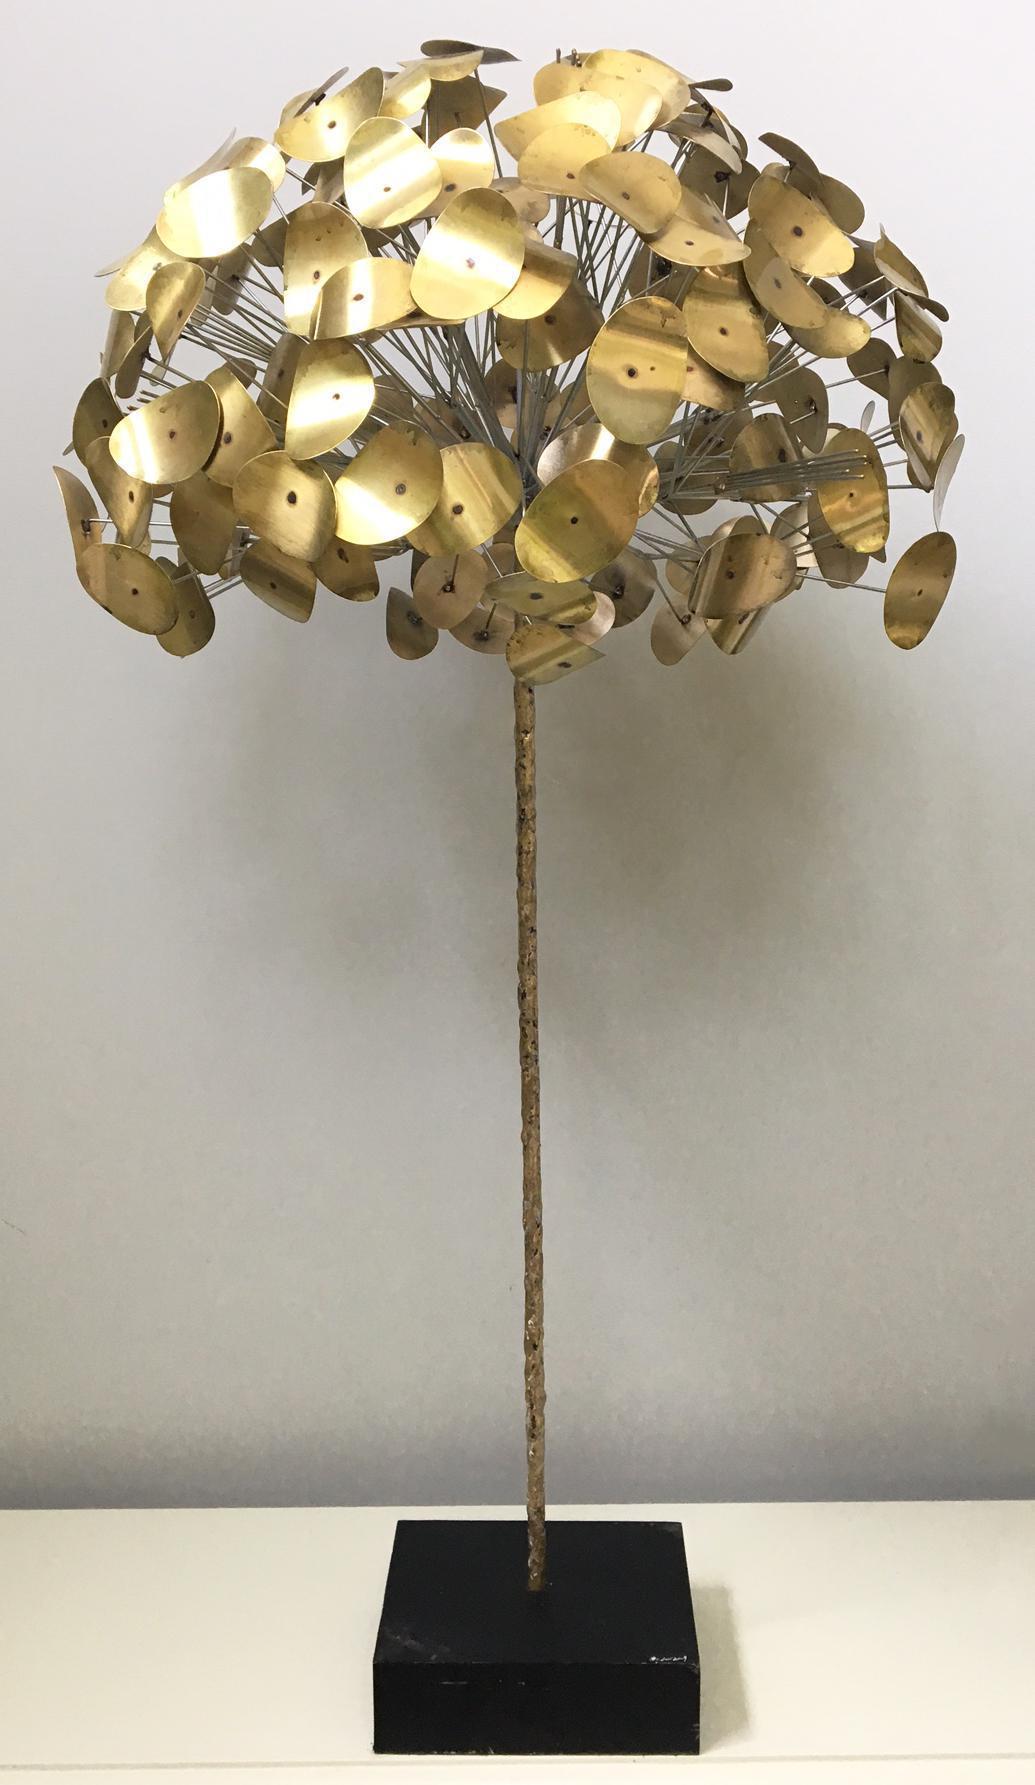 Rare Mid-Century Modern tree sculpture by C. Jere from the Raindrop series. In an exclusive partnership with Jonathan Adler, the Jere studio reissued a few iconic designs like this one.
Brass leaves on steel rods mounted in a black plinth base.